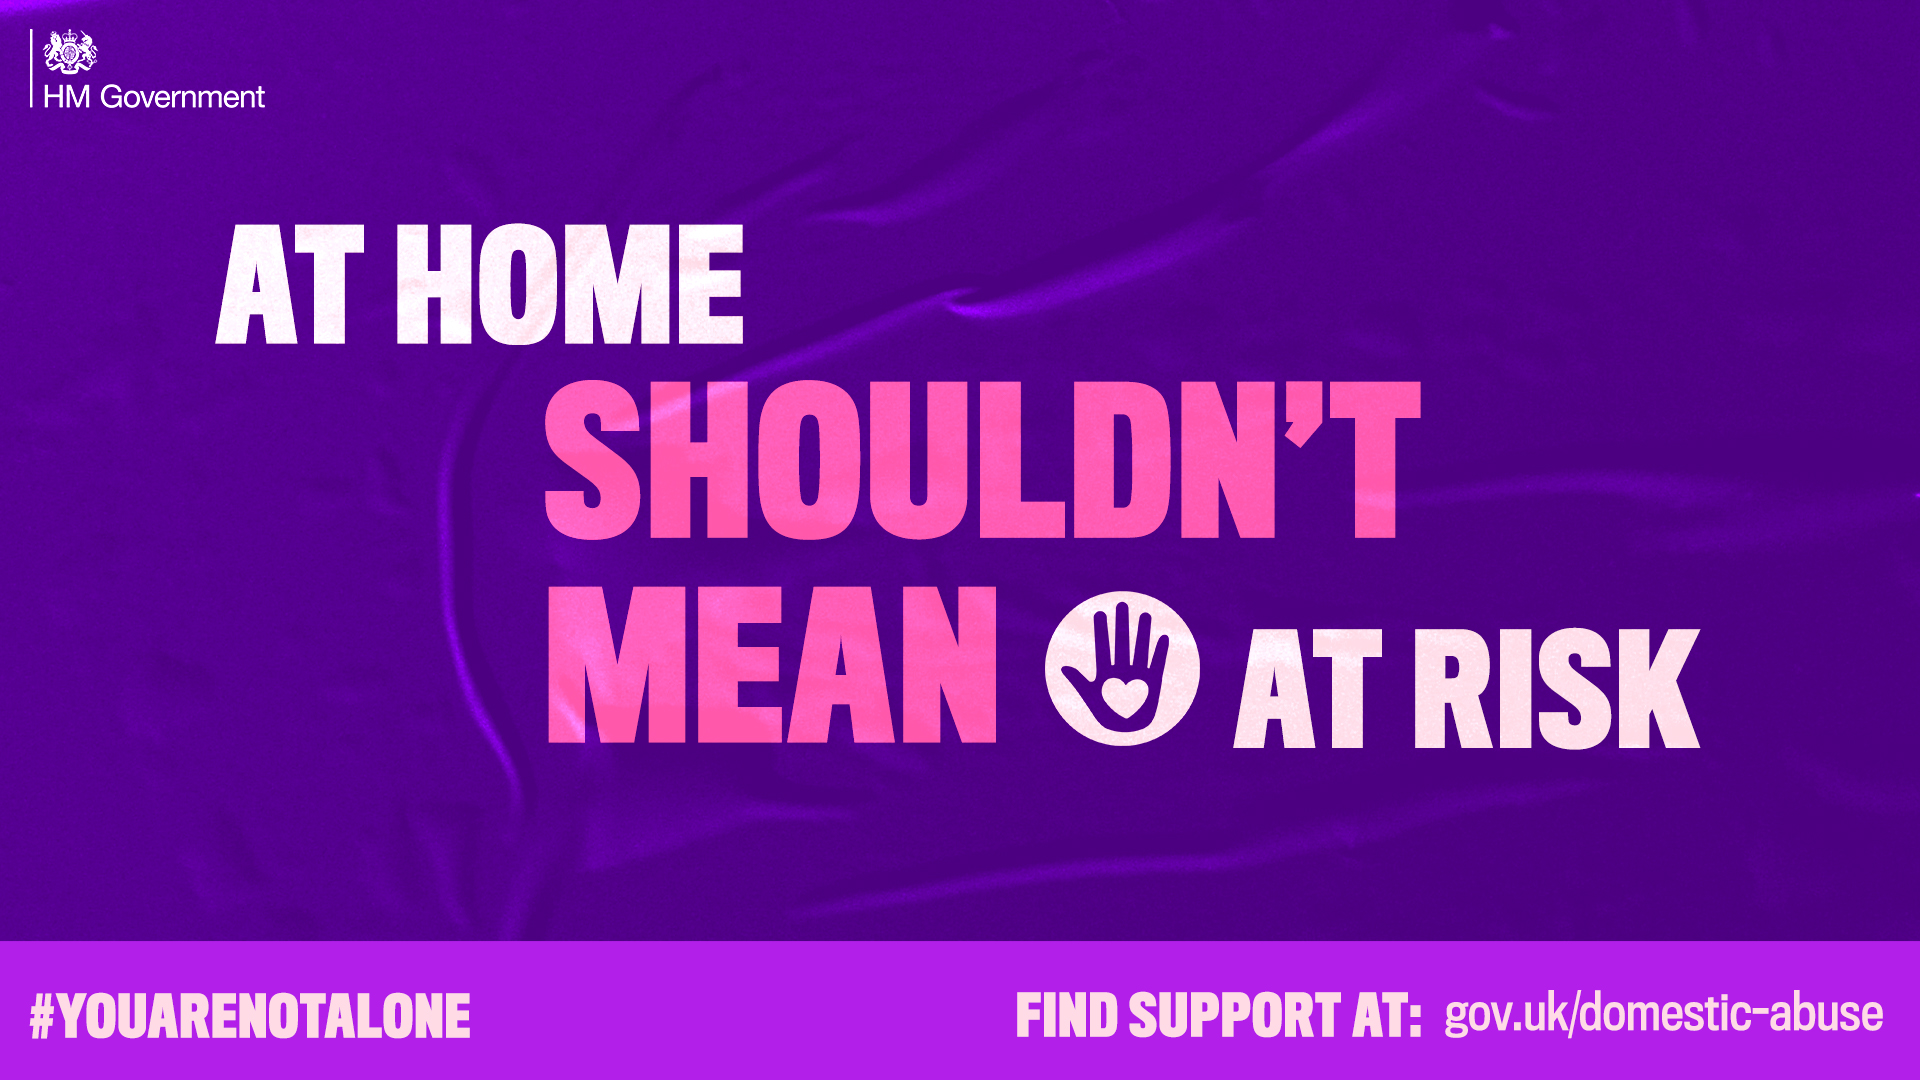 At home shouldn't mean at risk